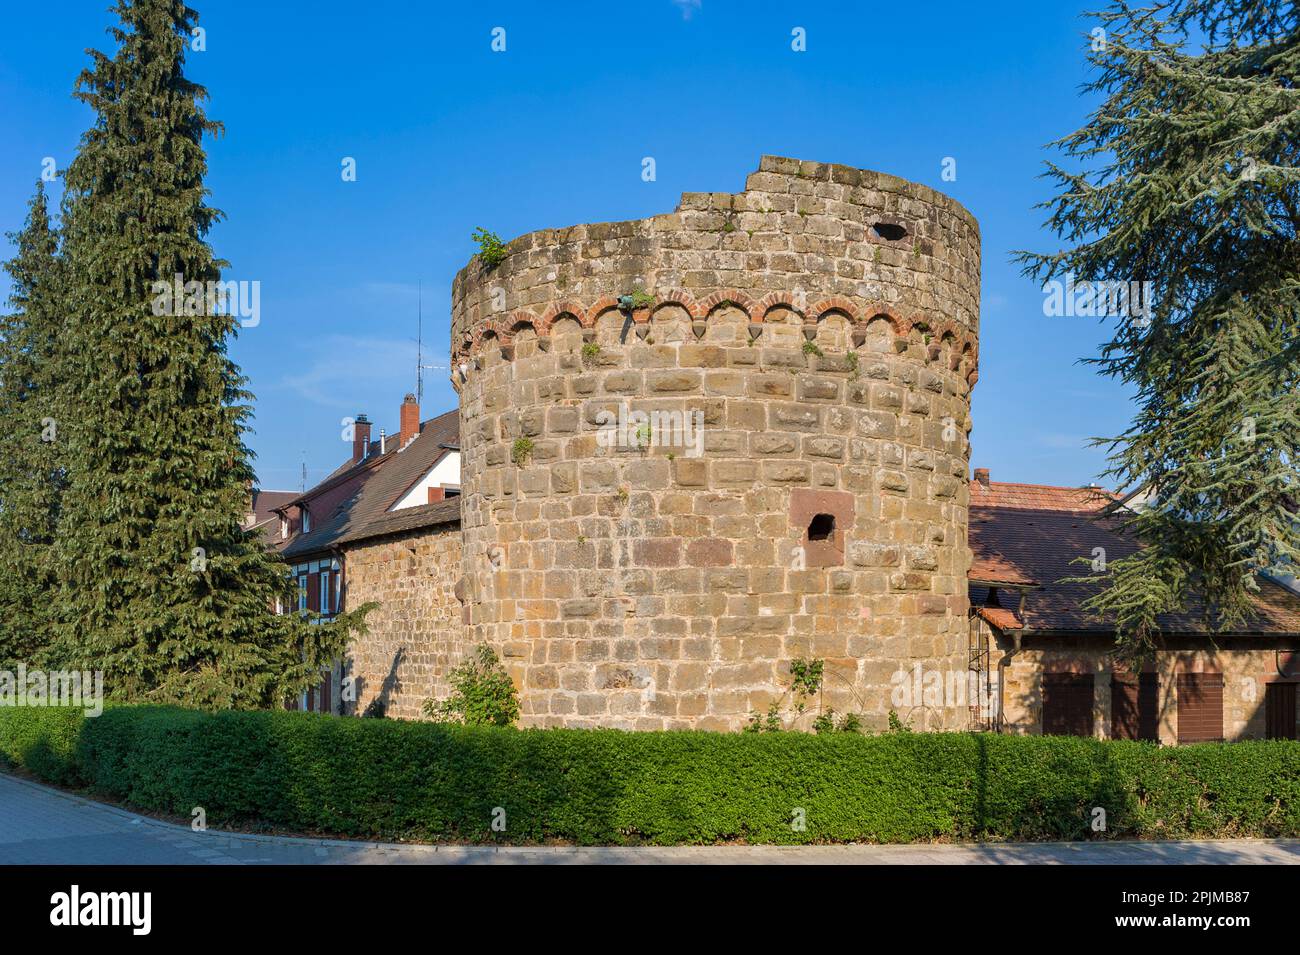 The so-called thick tower as a remnant of the former city wall, Bad Bergzabern, Palatinate, Rhineland-Palatinate, Germany, Europe Stock Photo